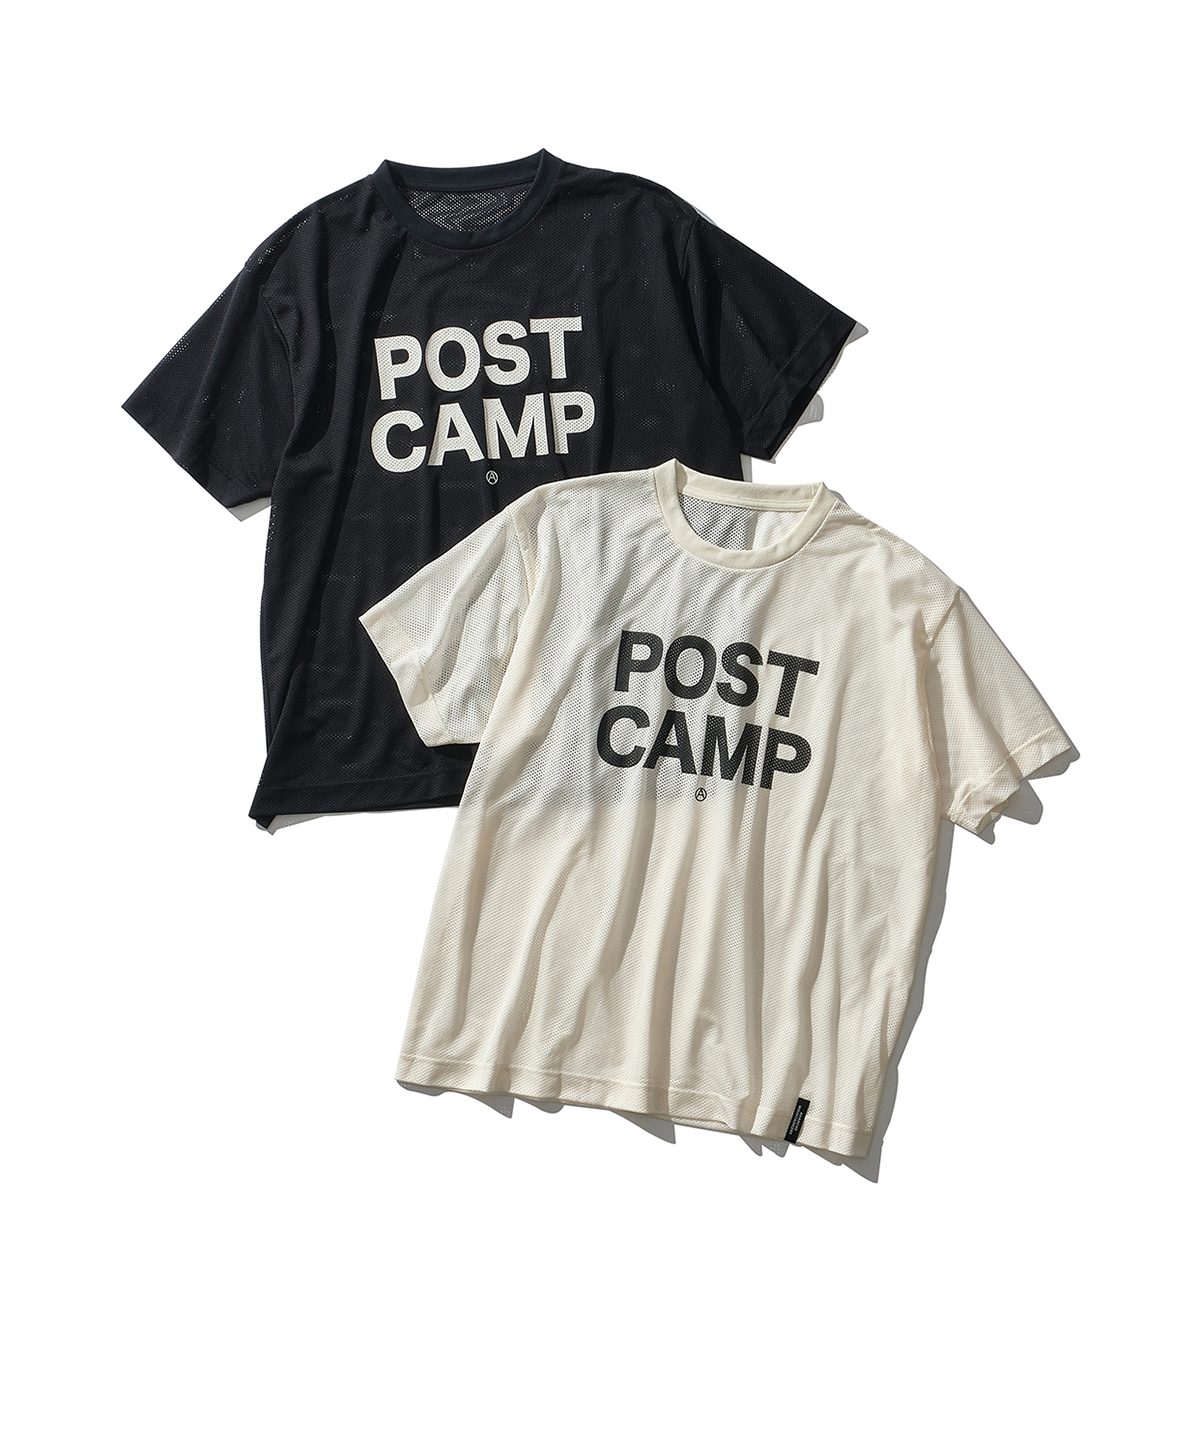 MOUNTAIN RESEARCH POST CAMP T-SHIRT